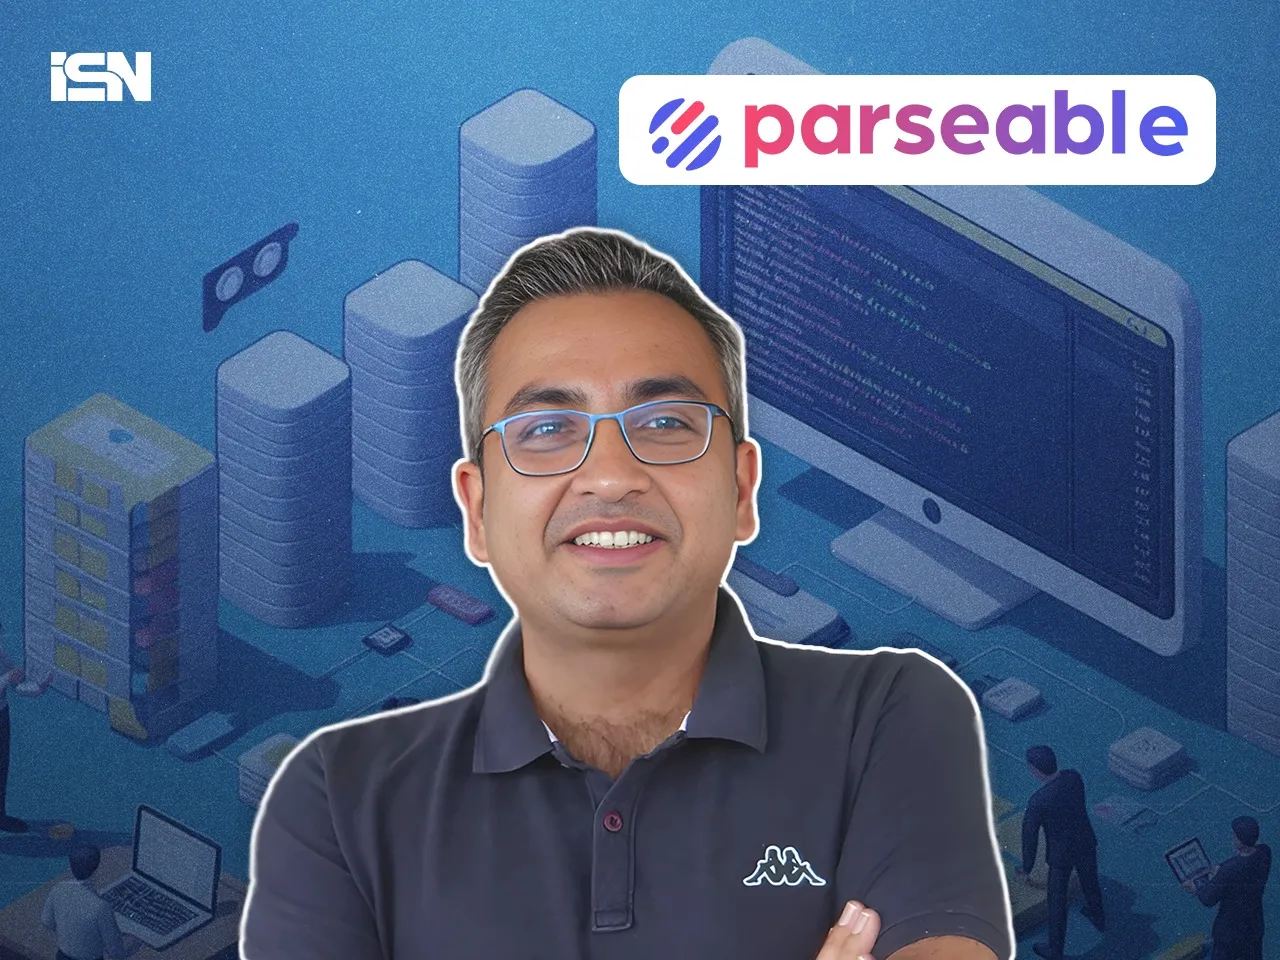 Log analytics startup Parseable raises $2.75M led by Surge and NP-Hard Ventures